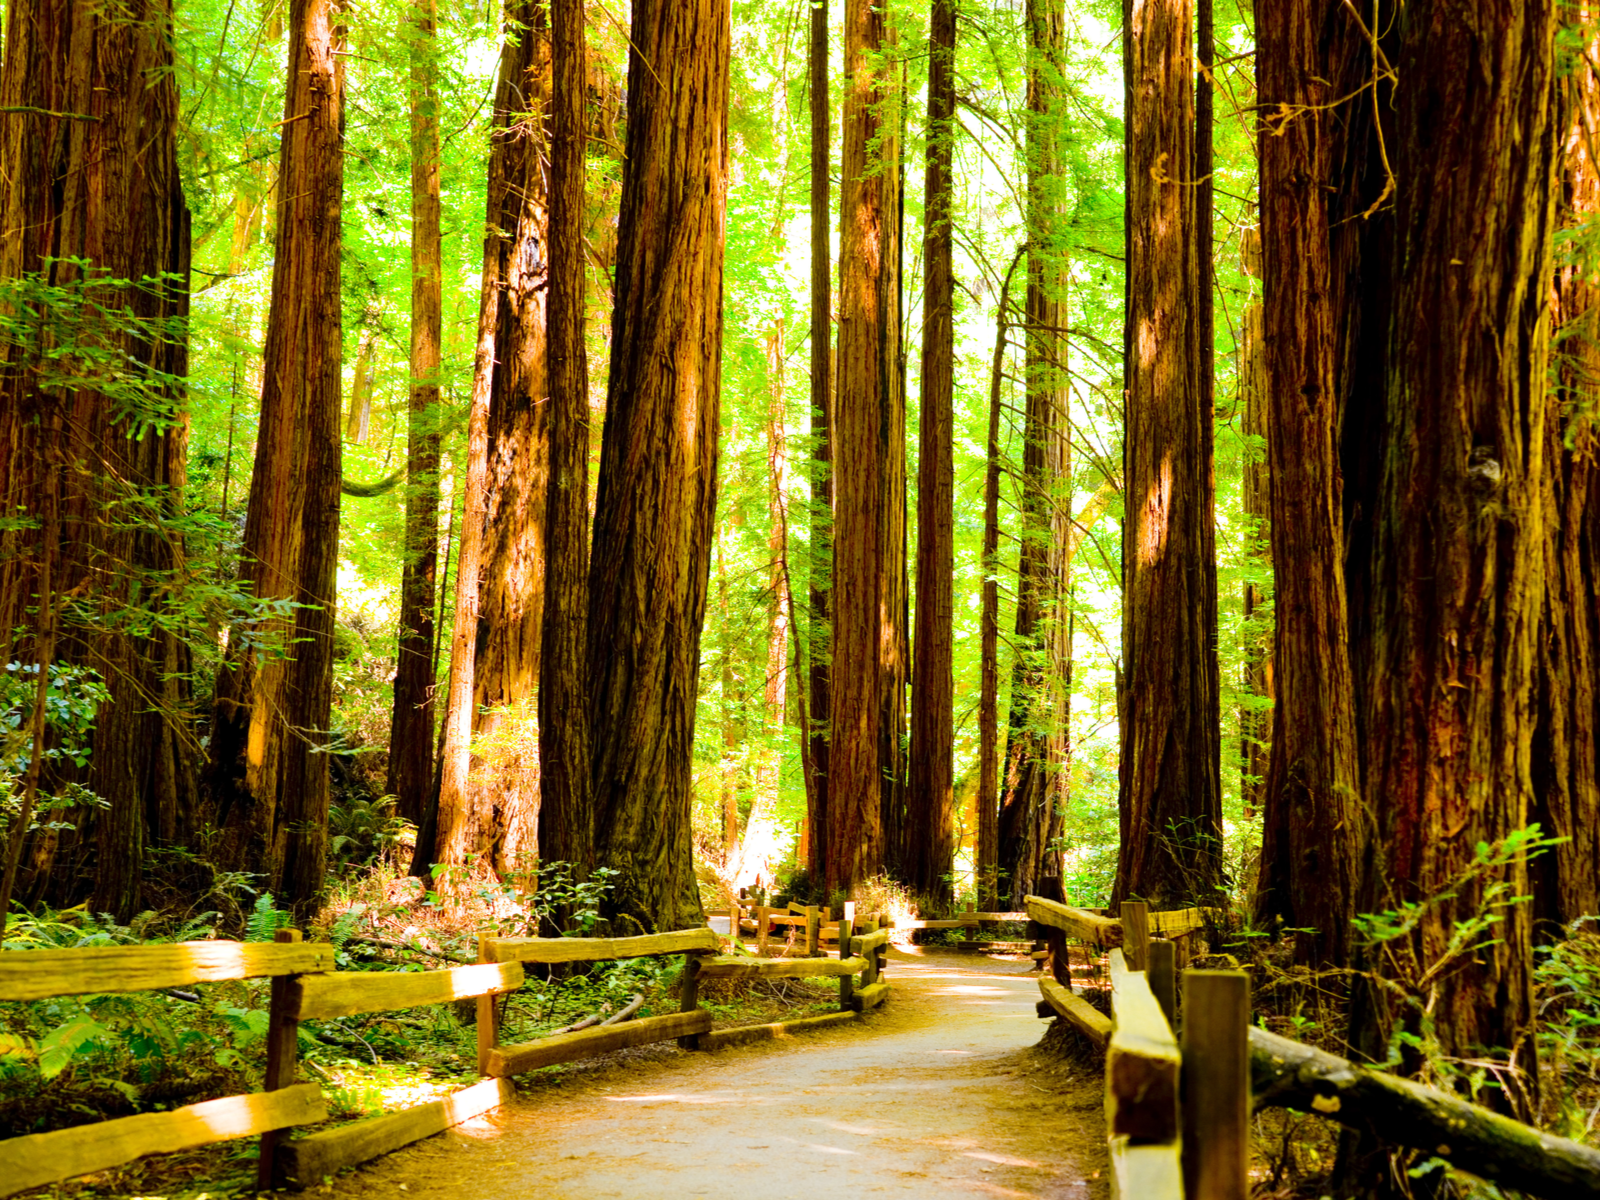 A dreamy scenery of a fenced trail in between tall gigantic trees at Redwoods National Park, hiking here is one of the best things to do in California